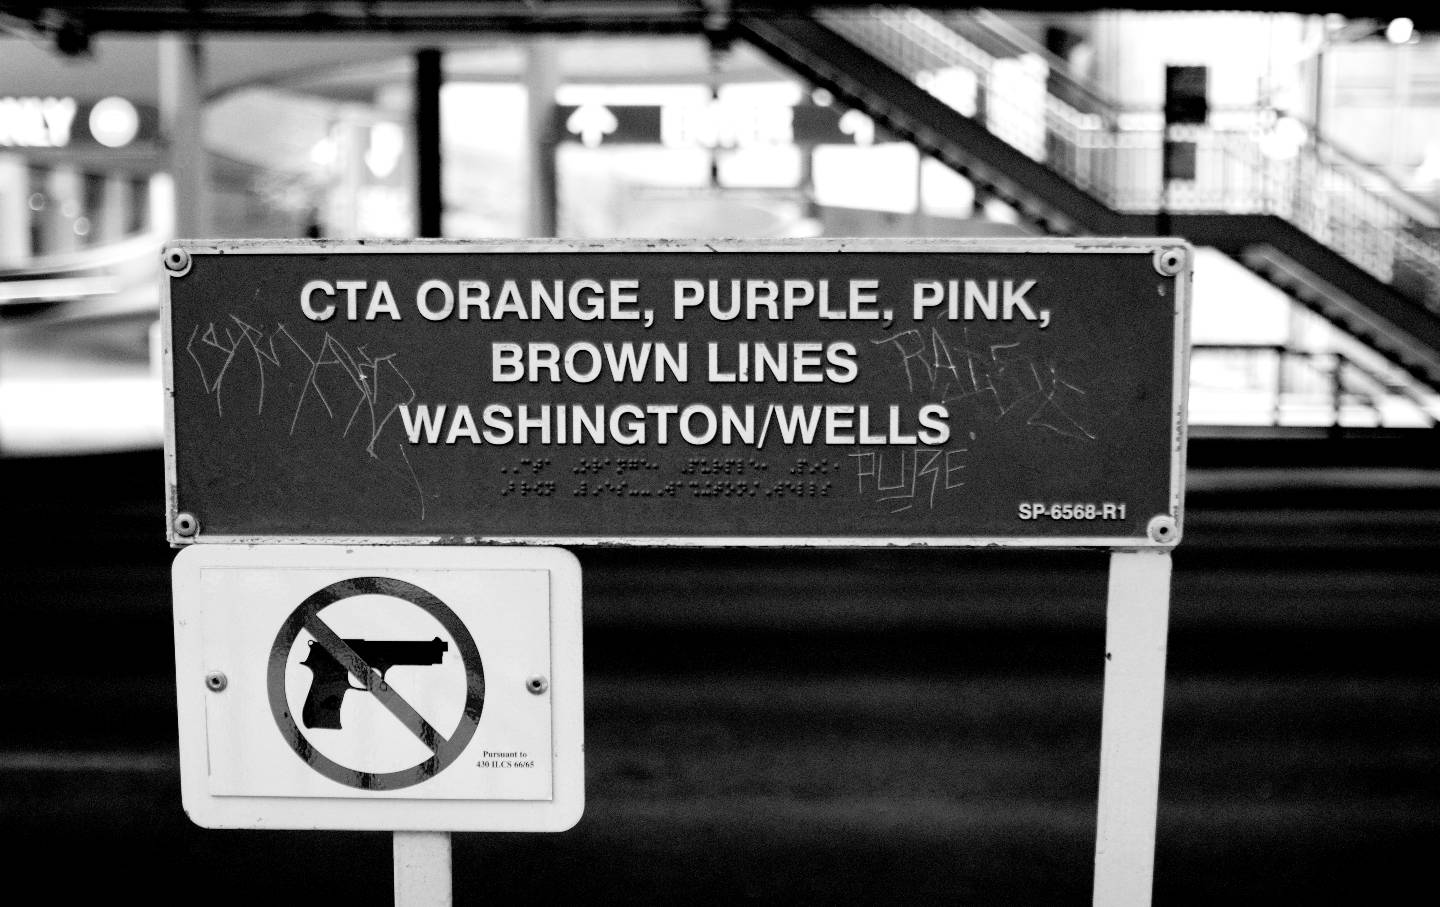 A sign showing that guns are not allowed, in black and white